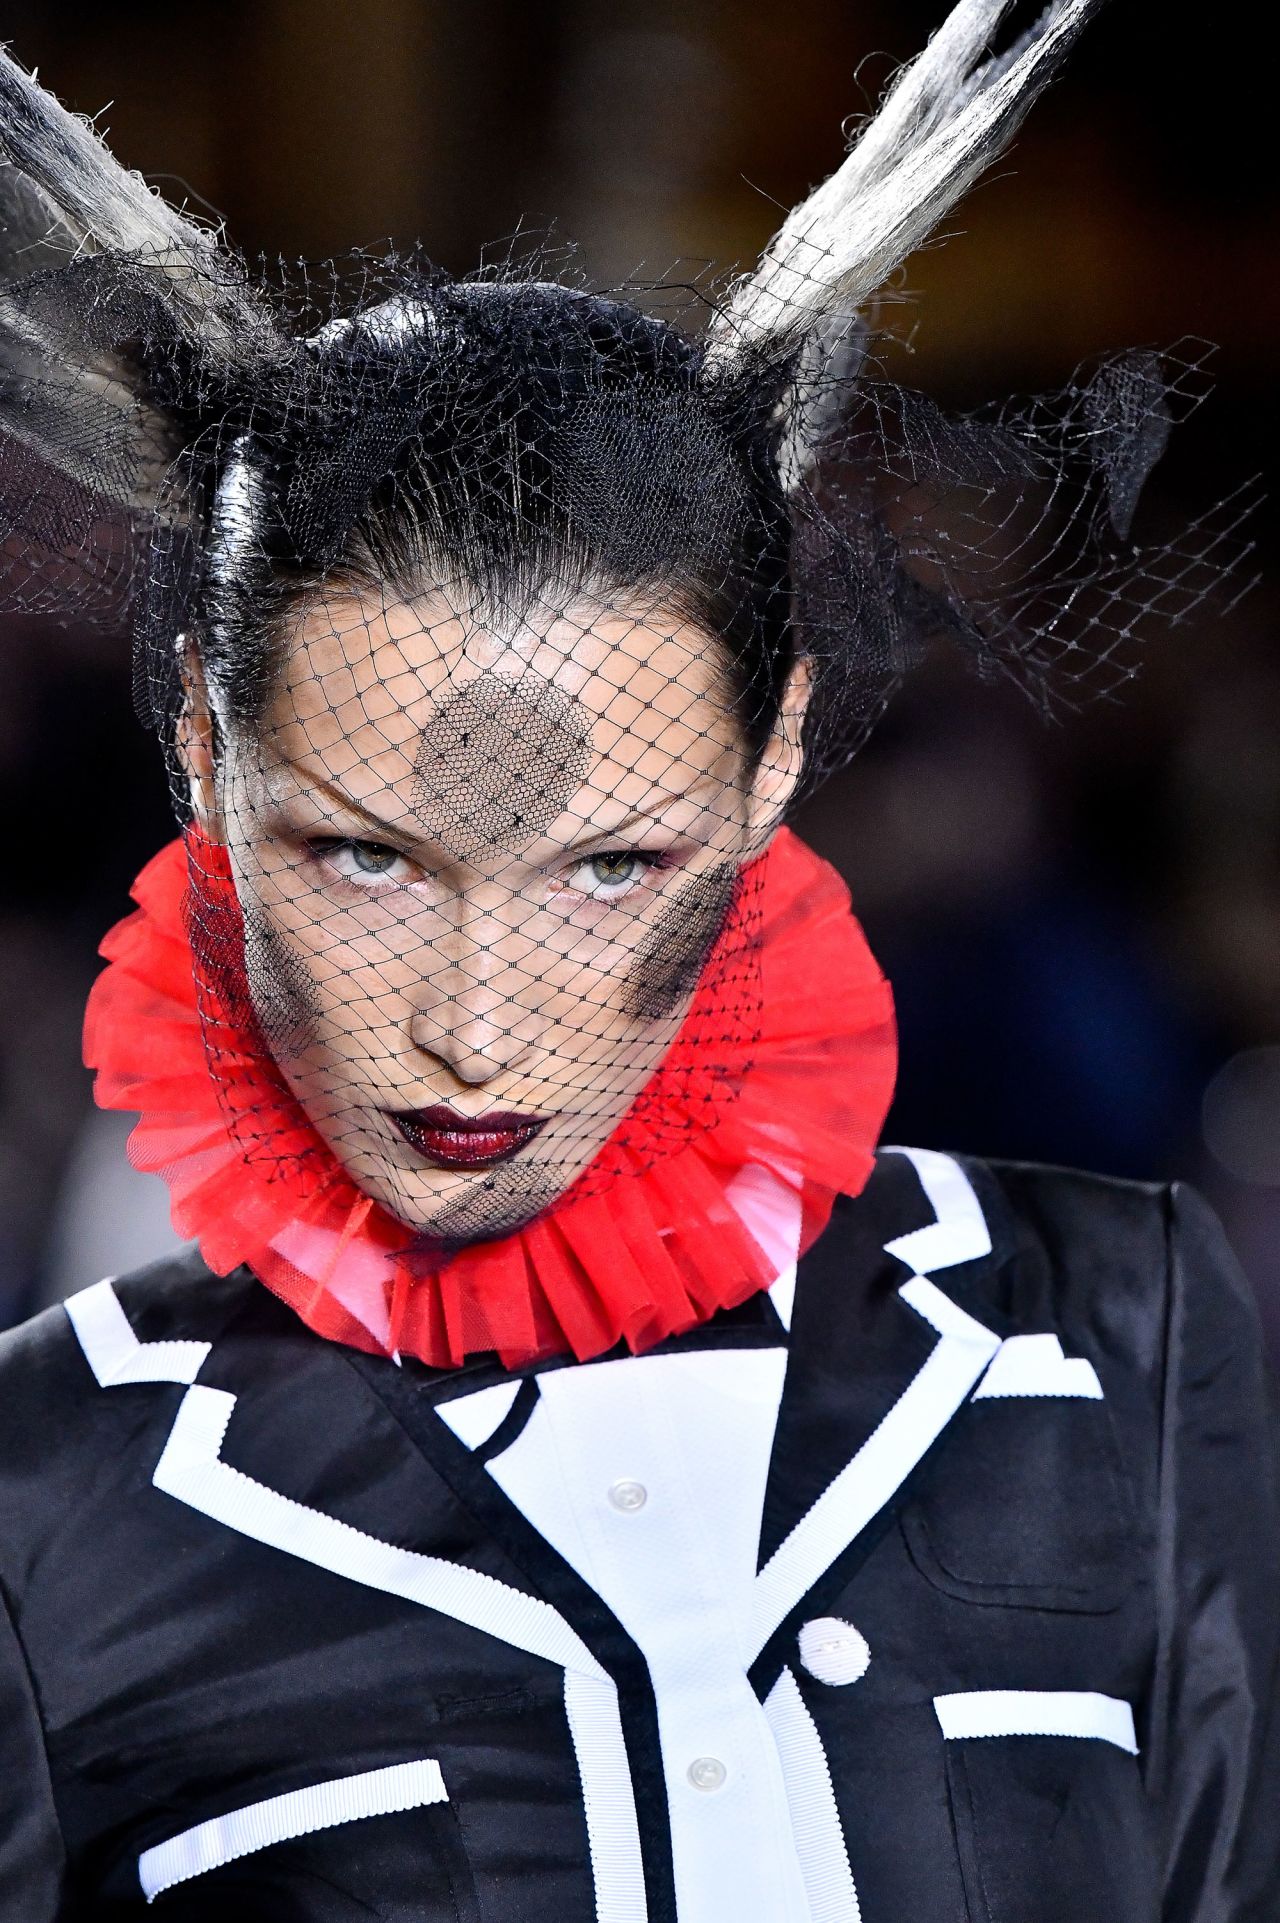 Tulle collars popped up from long opera coats complete with preppy, varsity-style piping.